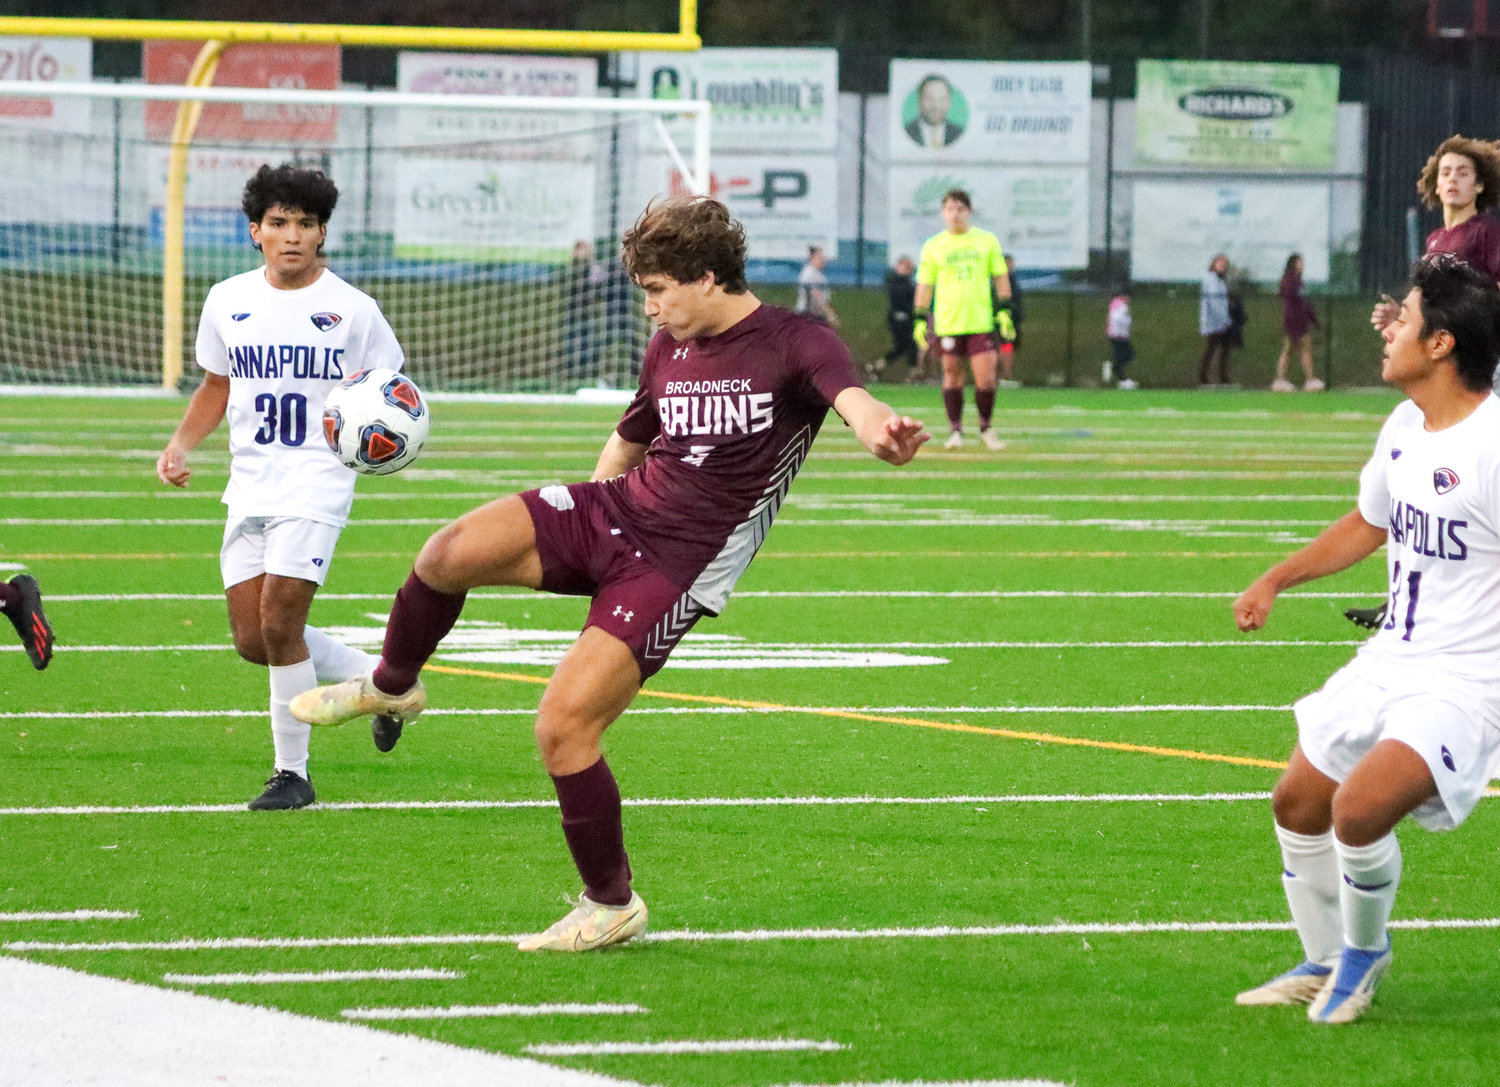 Riley Erbe maintained possession for Broadneck.